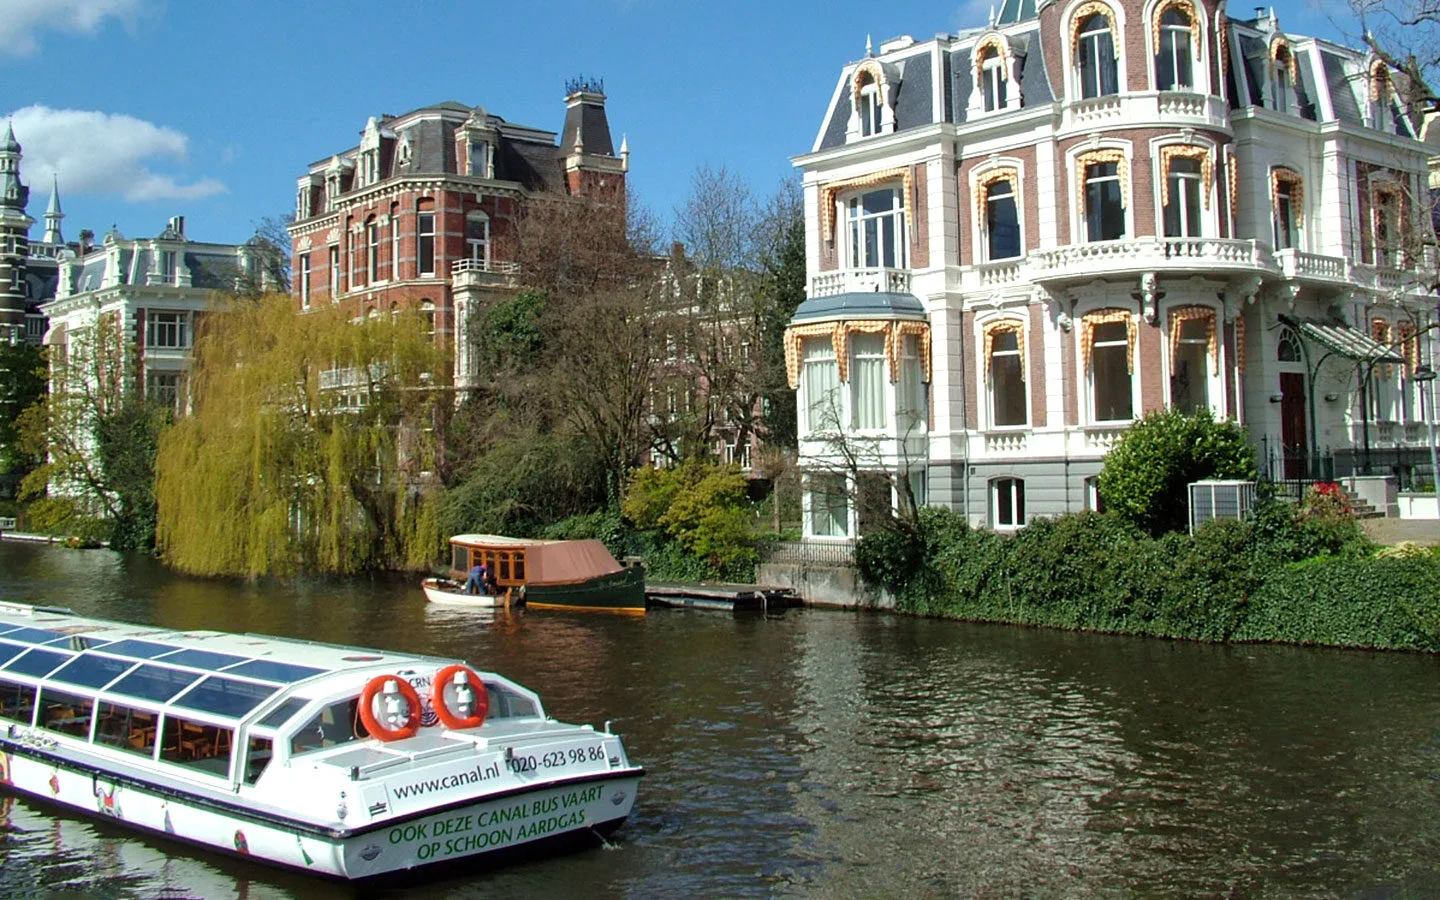 Boat trip on the canals in Amsterdam